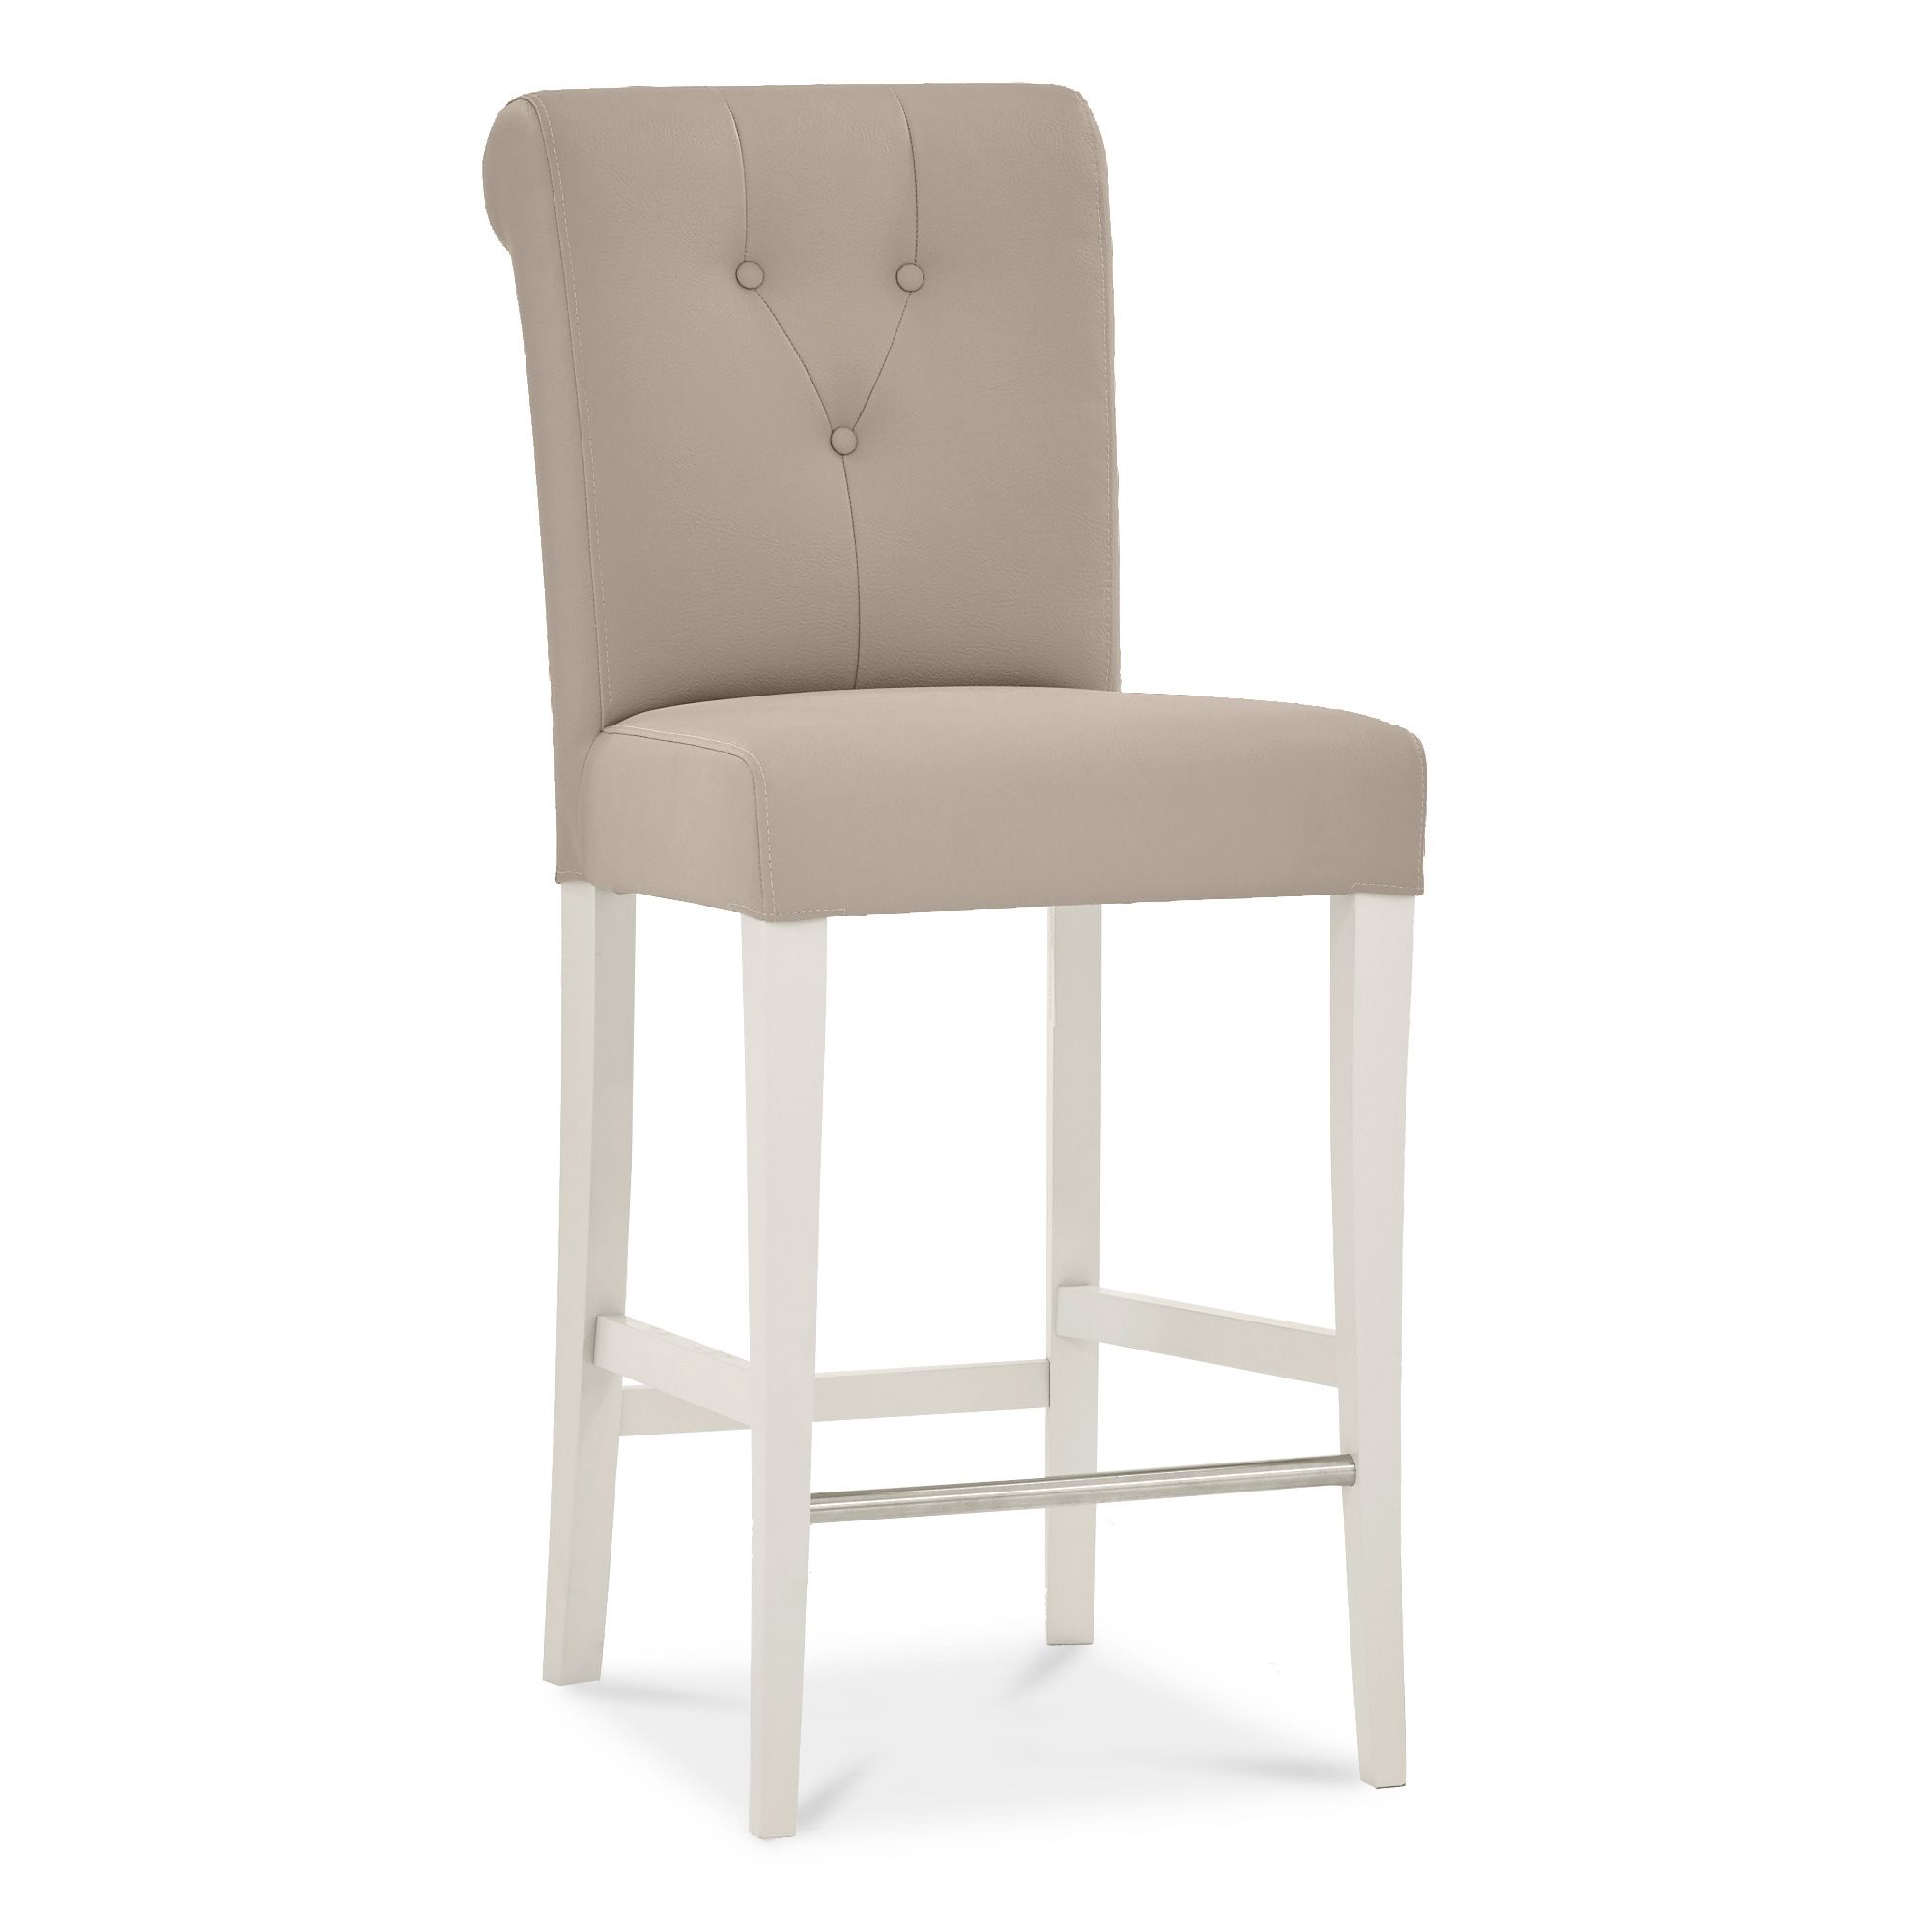 Freeport Low Bar Stool Faux Leather, Faux Leather Bar Stools Grey